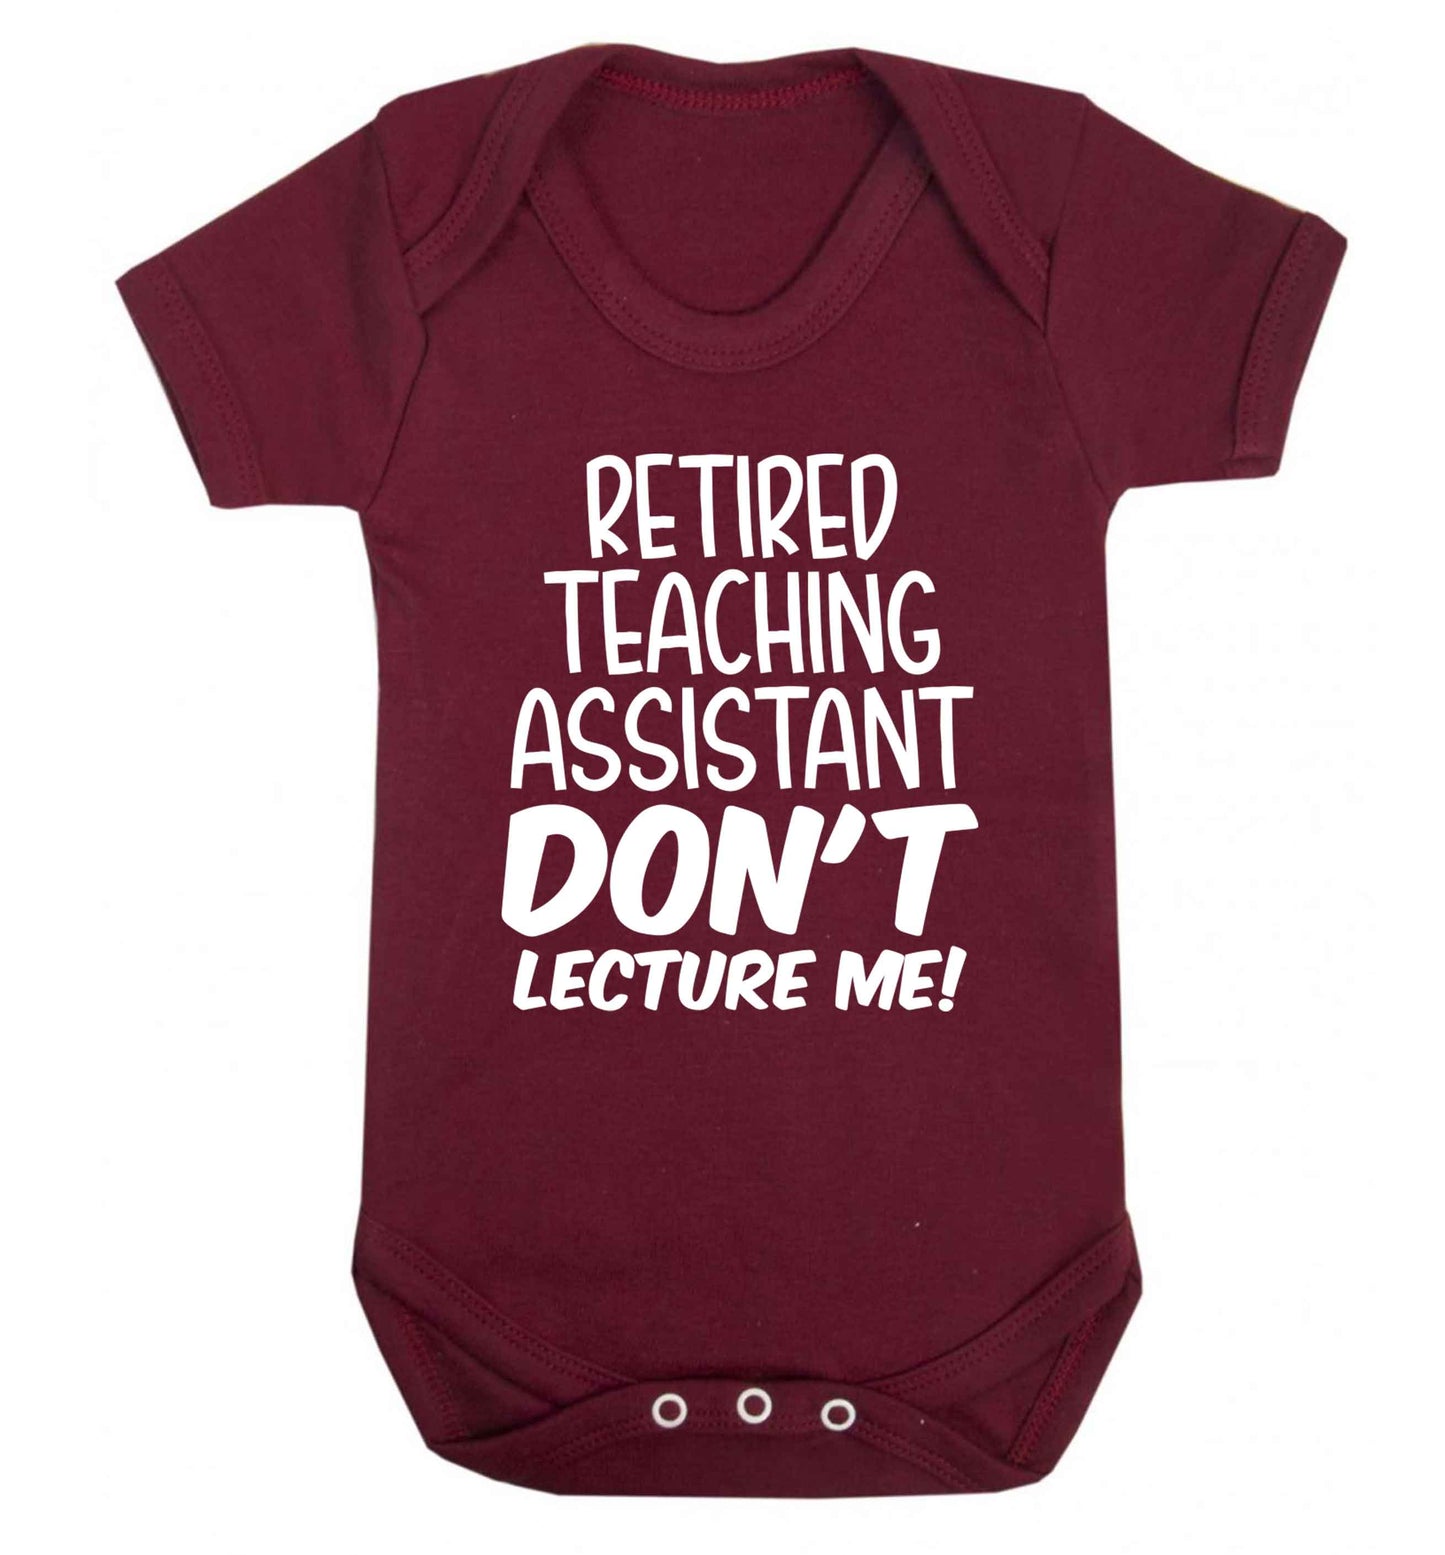 Retired teaching assistant don't lecture me Baby Vest maroon 18-24 months